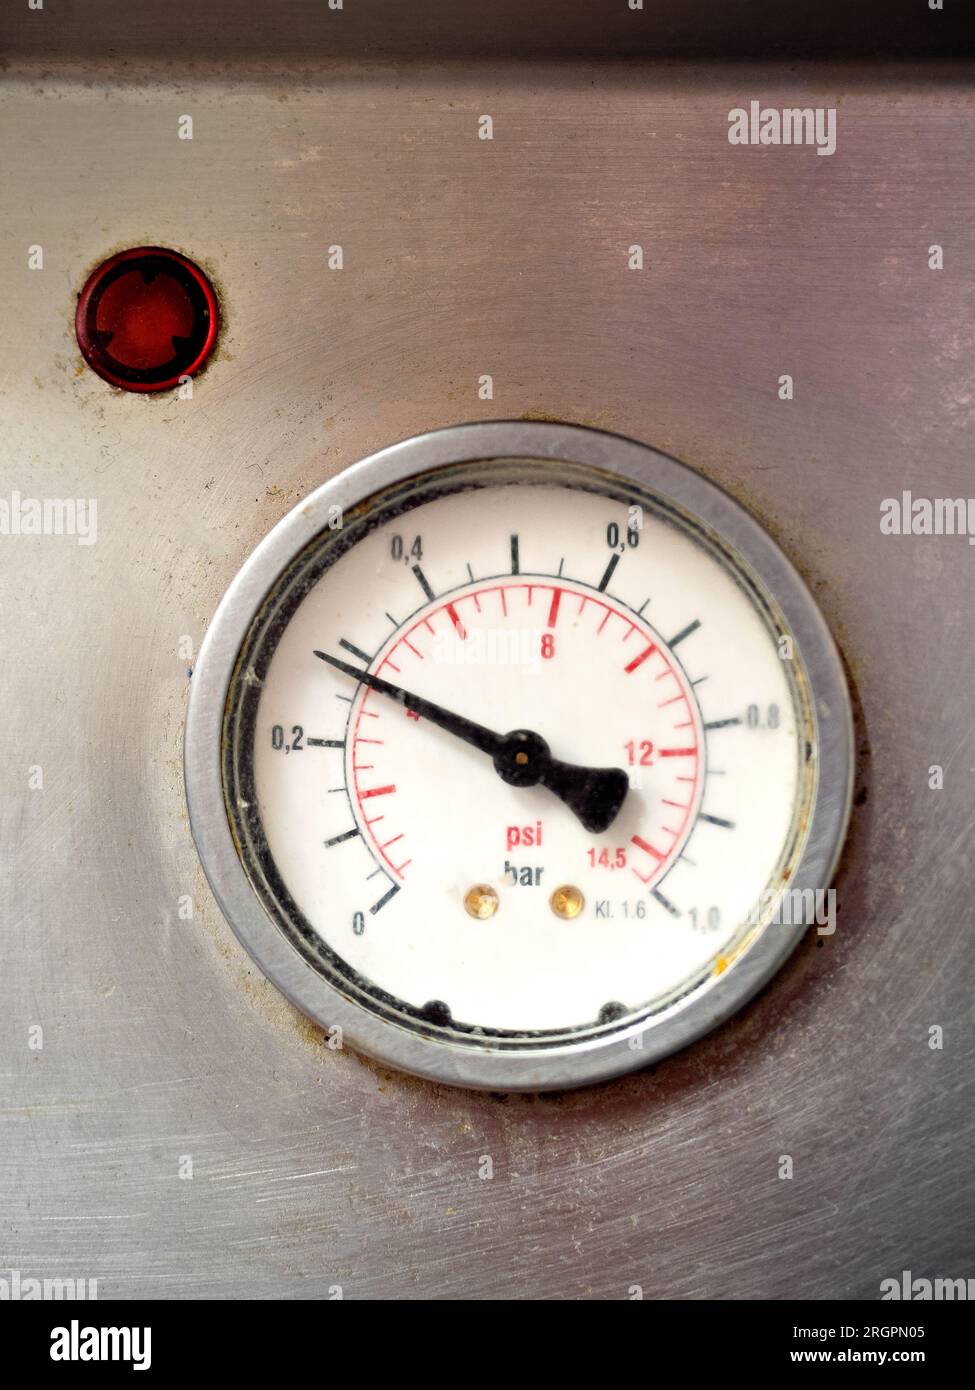 Steam pressure gauge measure showing current bar of the machine with red over pressure warning light Stock Photo